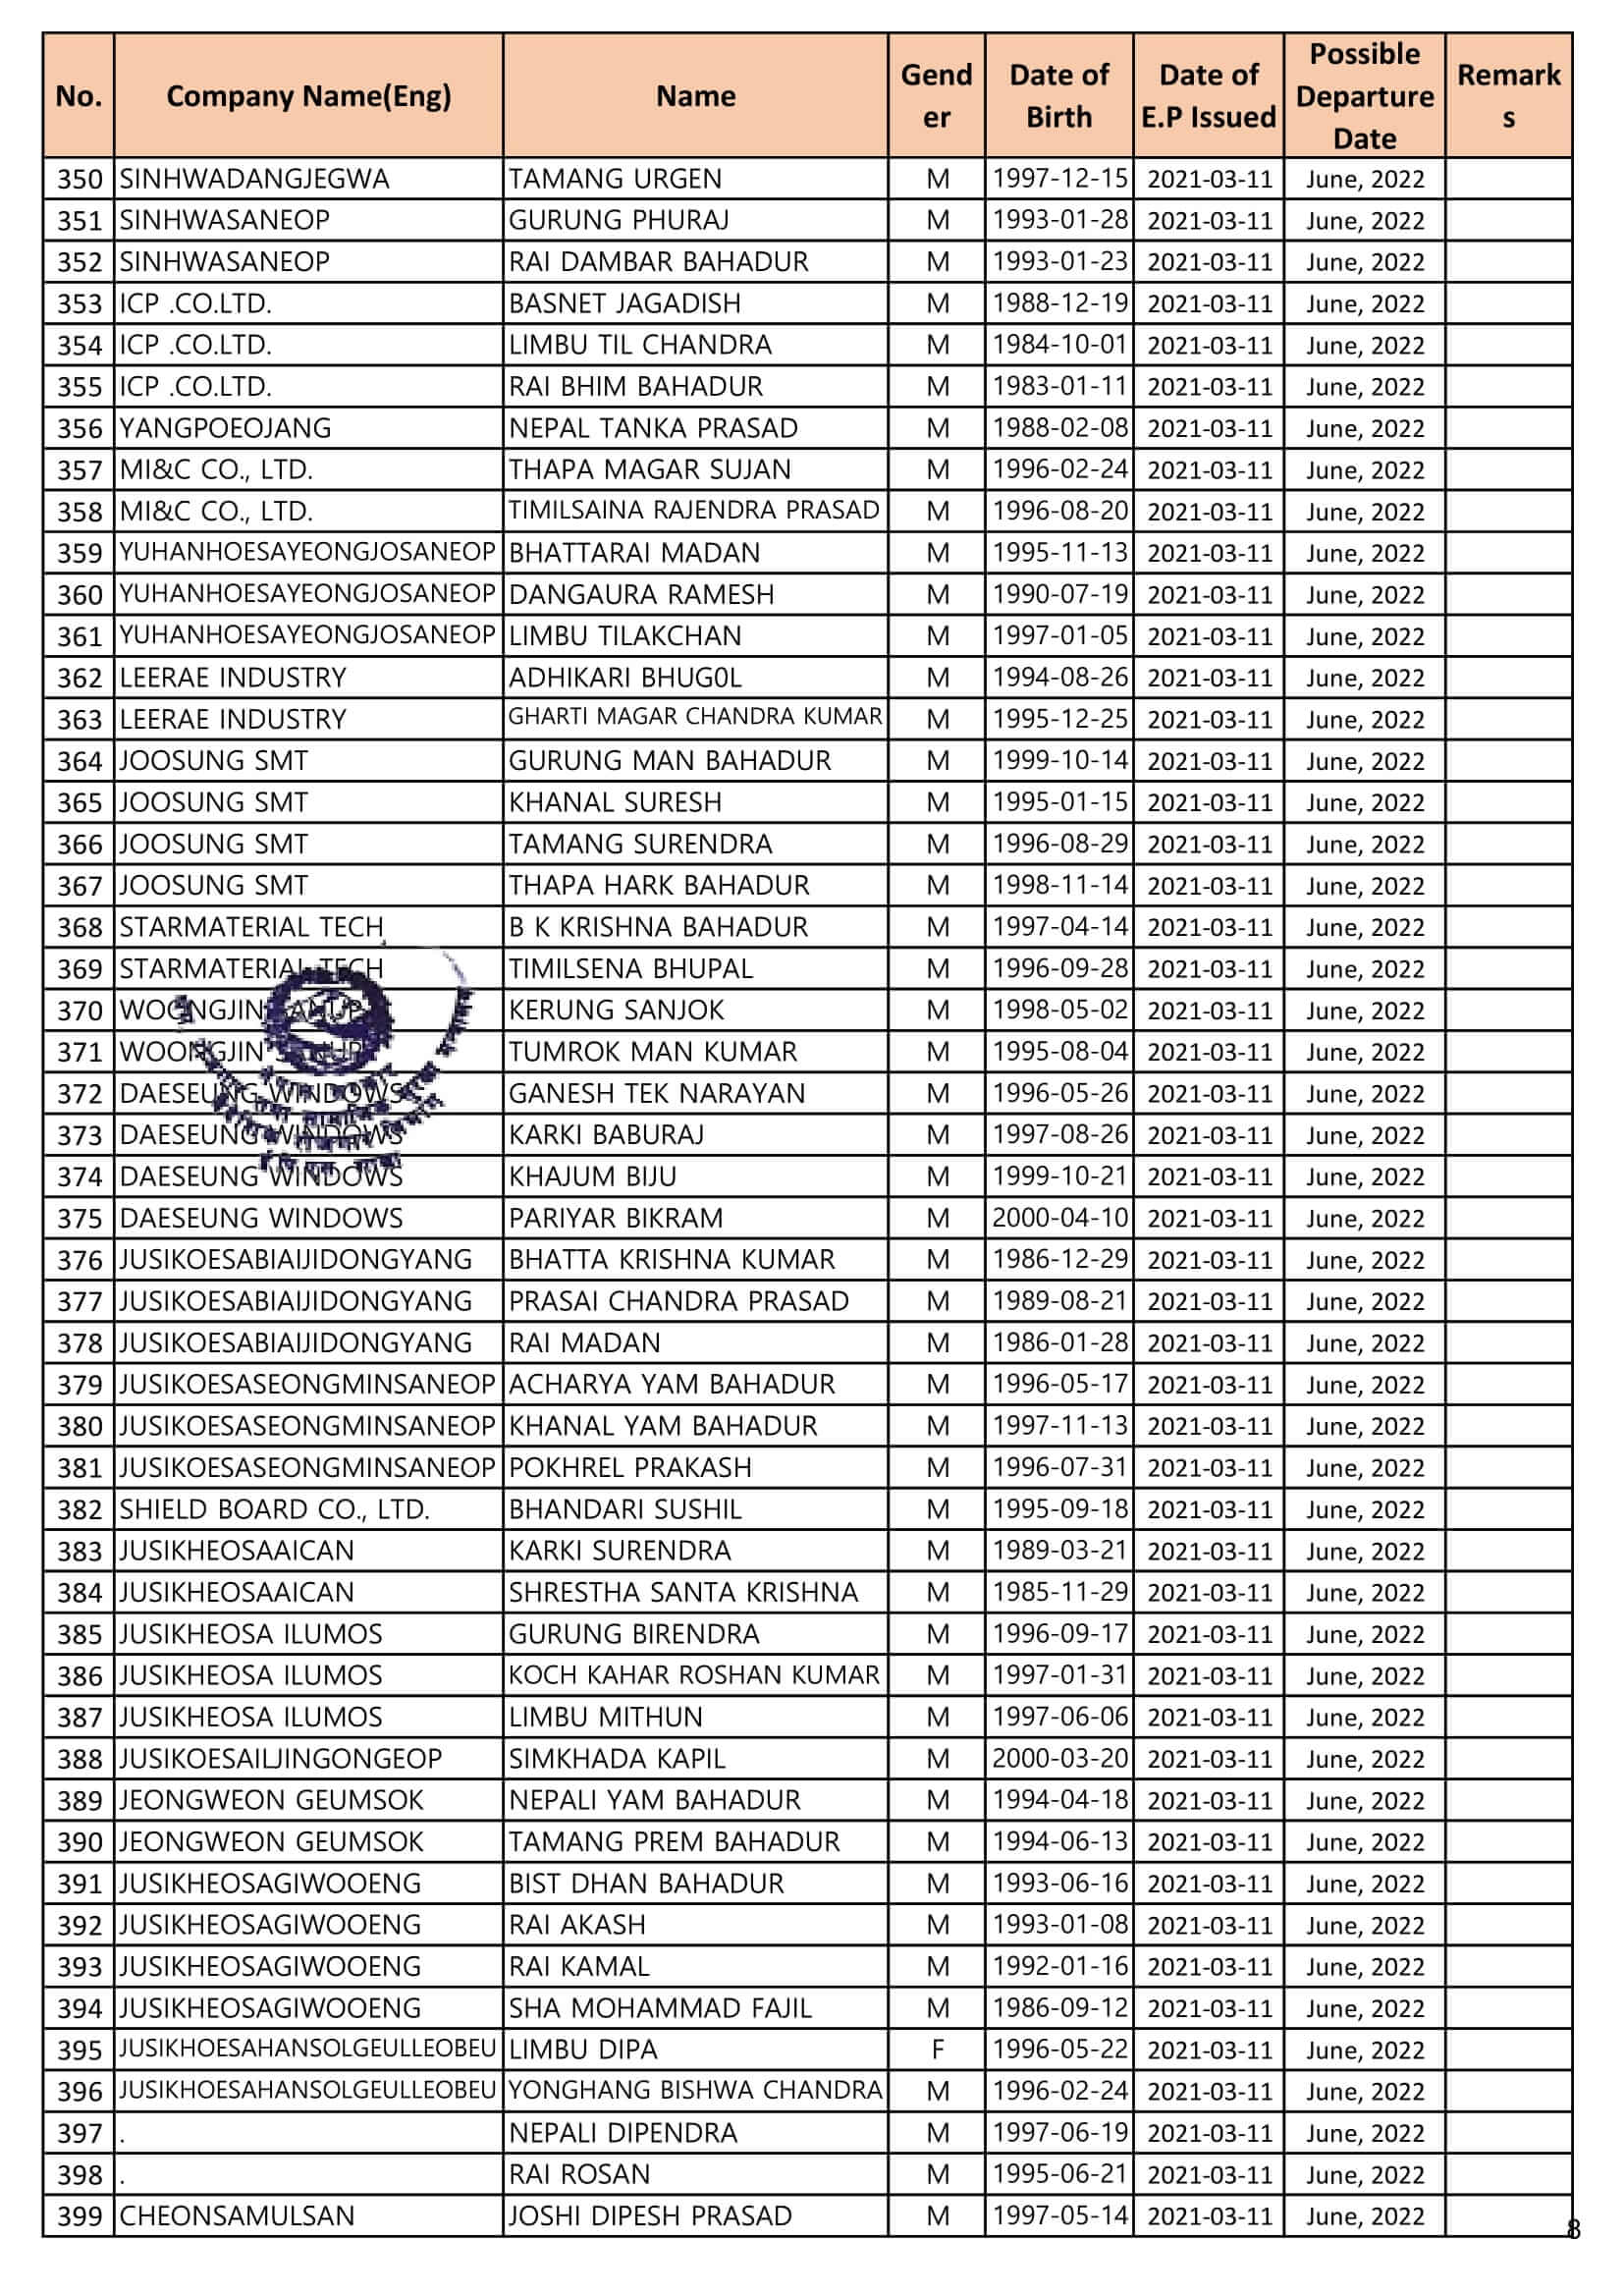 Proposed Entry list of Regular Manufacture Workers